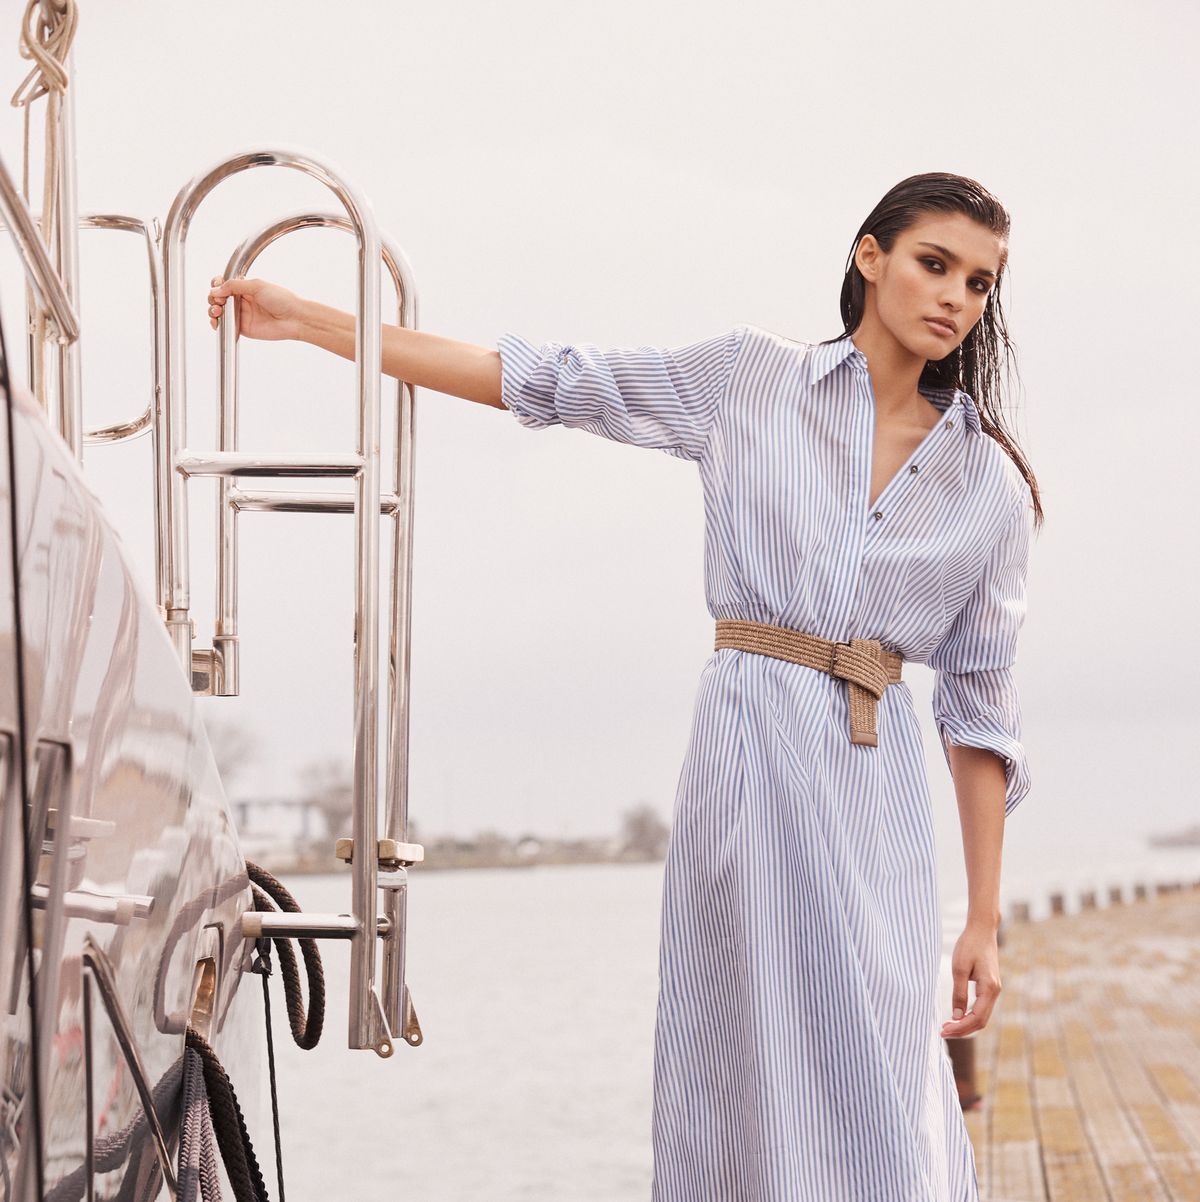 Saks Just Launched an Exclusive Brunello Cucinelli Women's Sailing